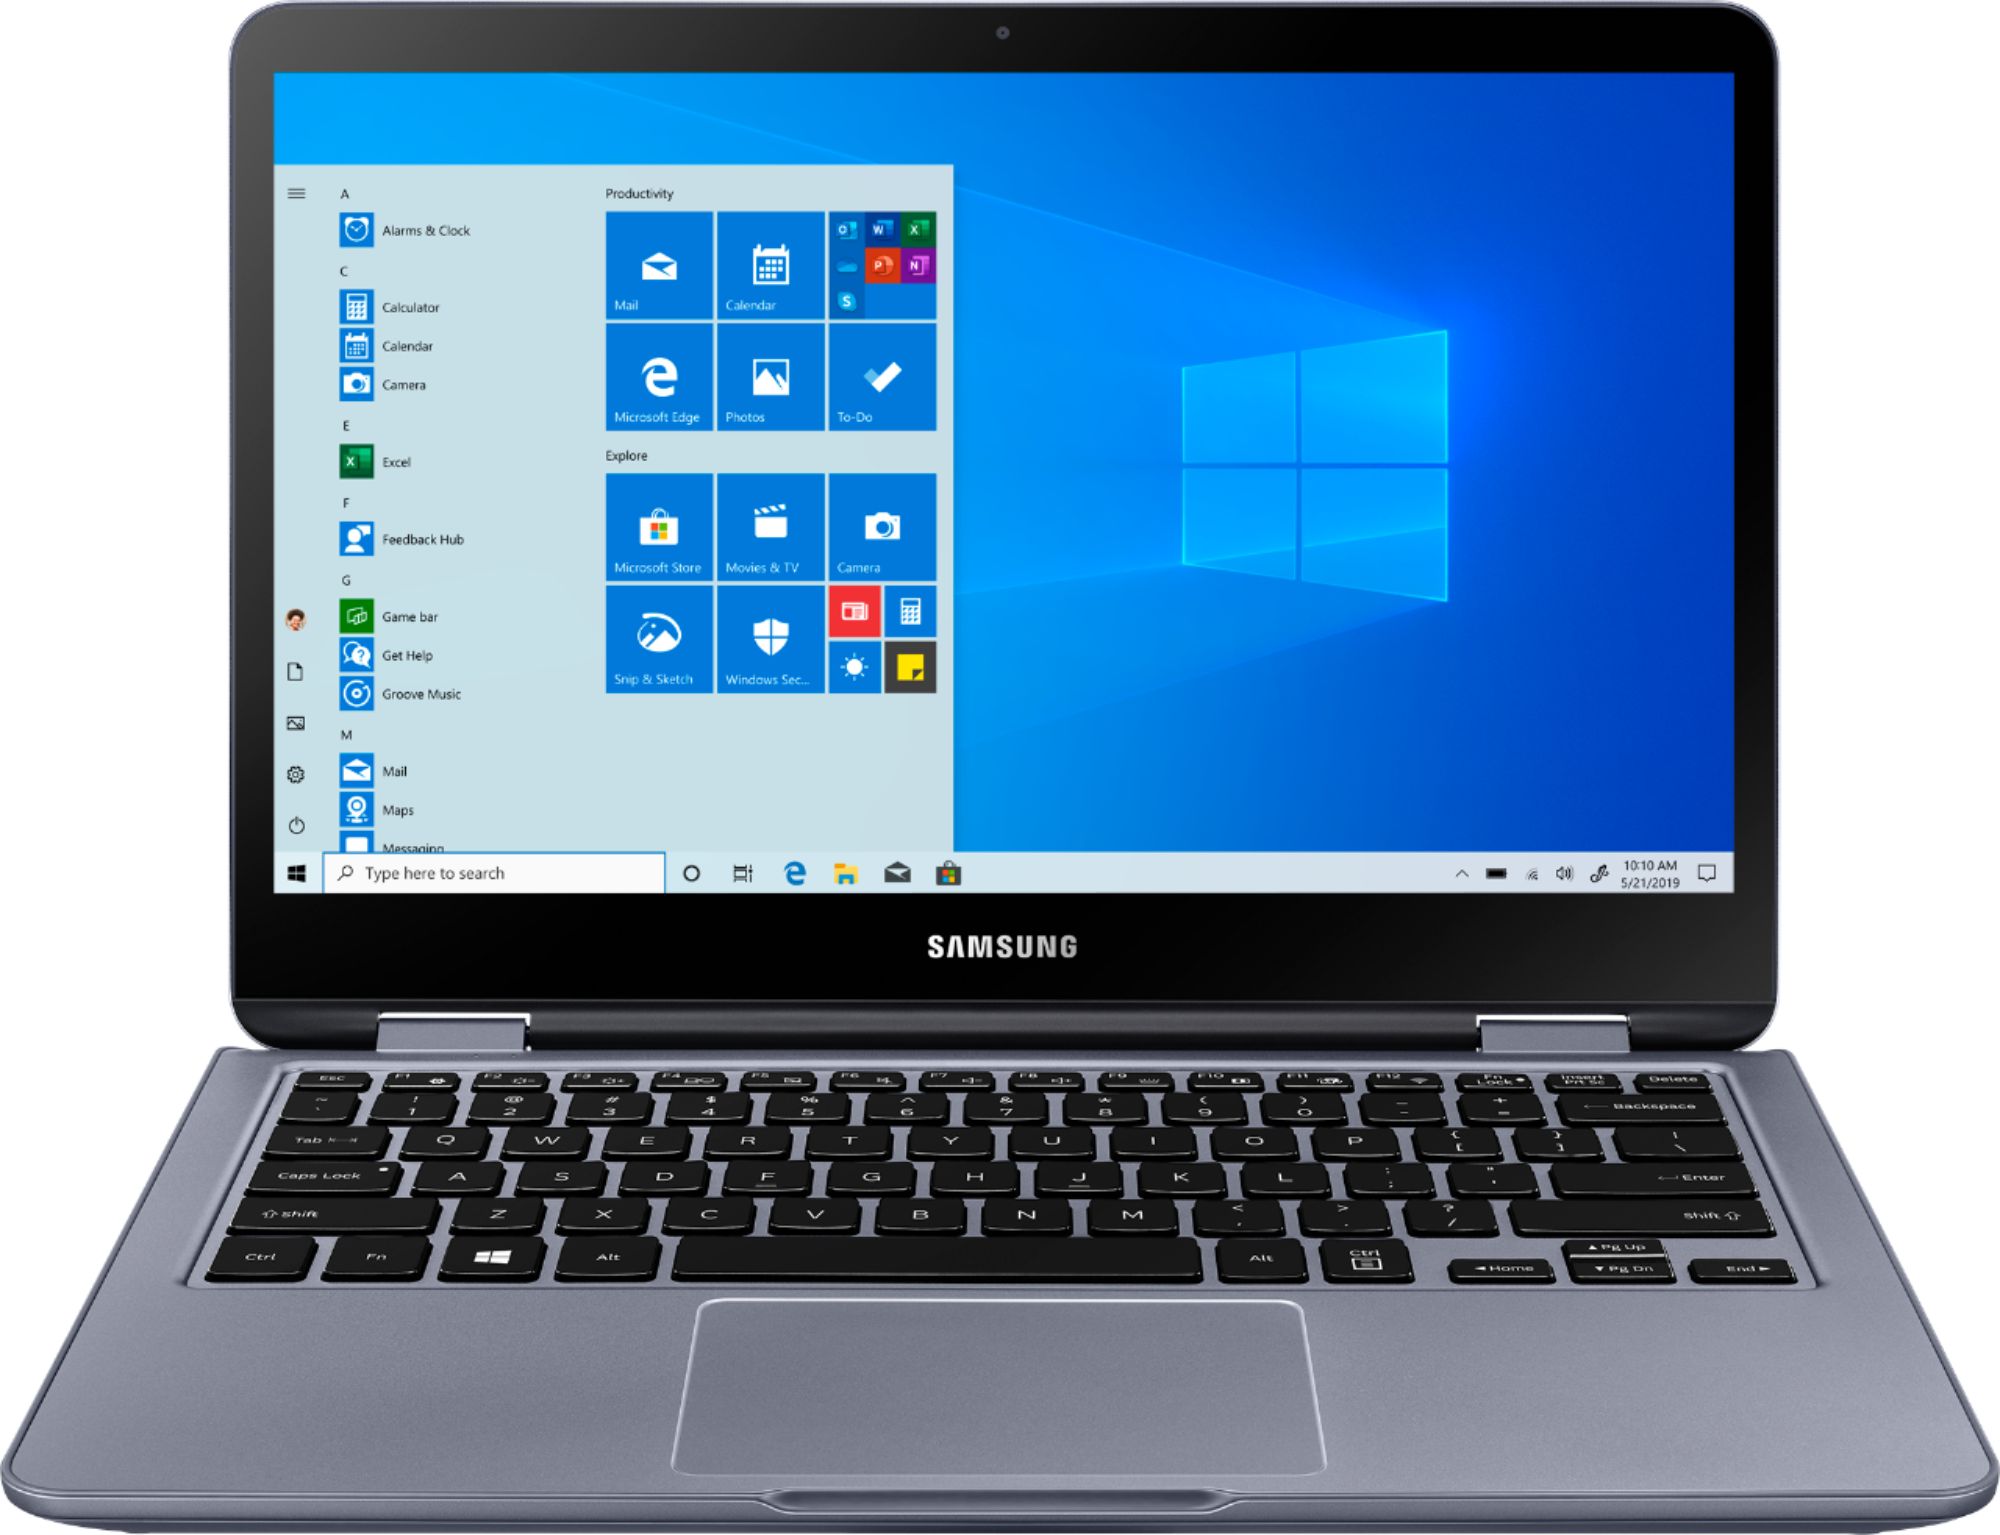 Samsung - Notebook 7 Spin 2-in-1 13.3" Touch-Screen Laptop - Intel Core i5 - 8GB Memory - 512GB Solid State Drive - Stealth Silver